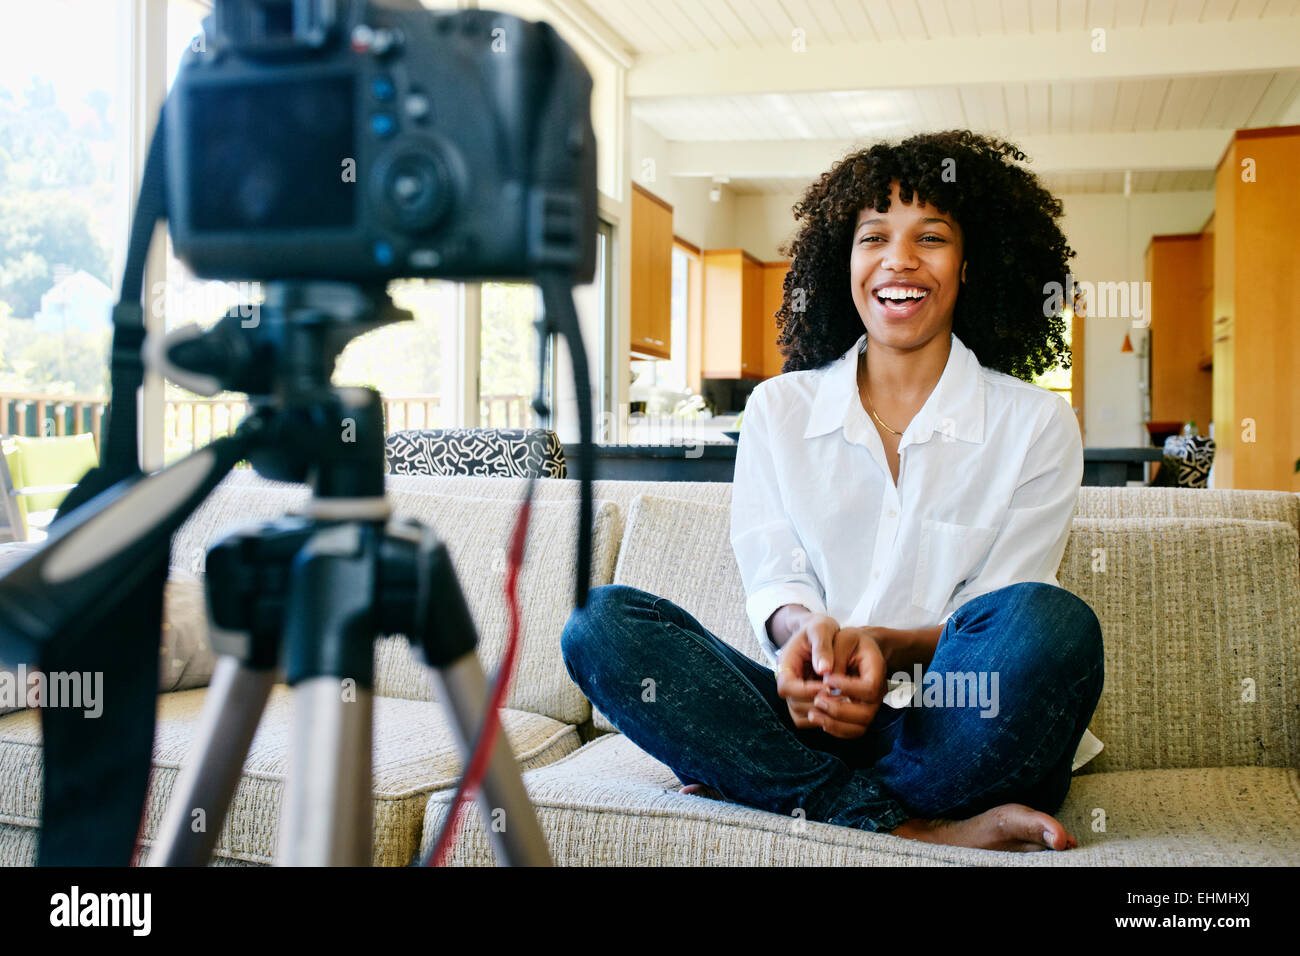 Mixed race woman recording video of herself in living room Stock Photo